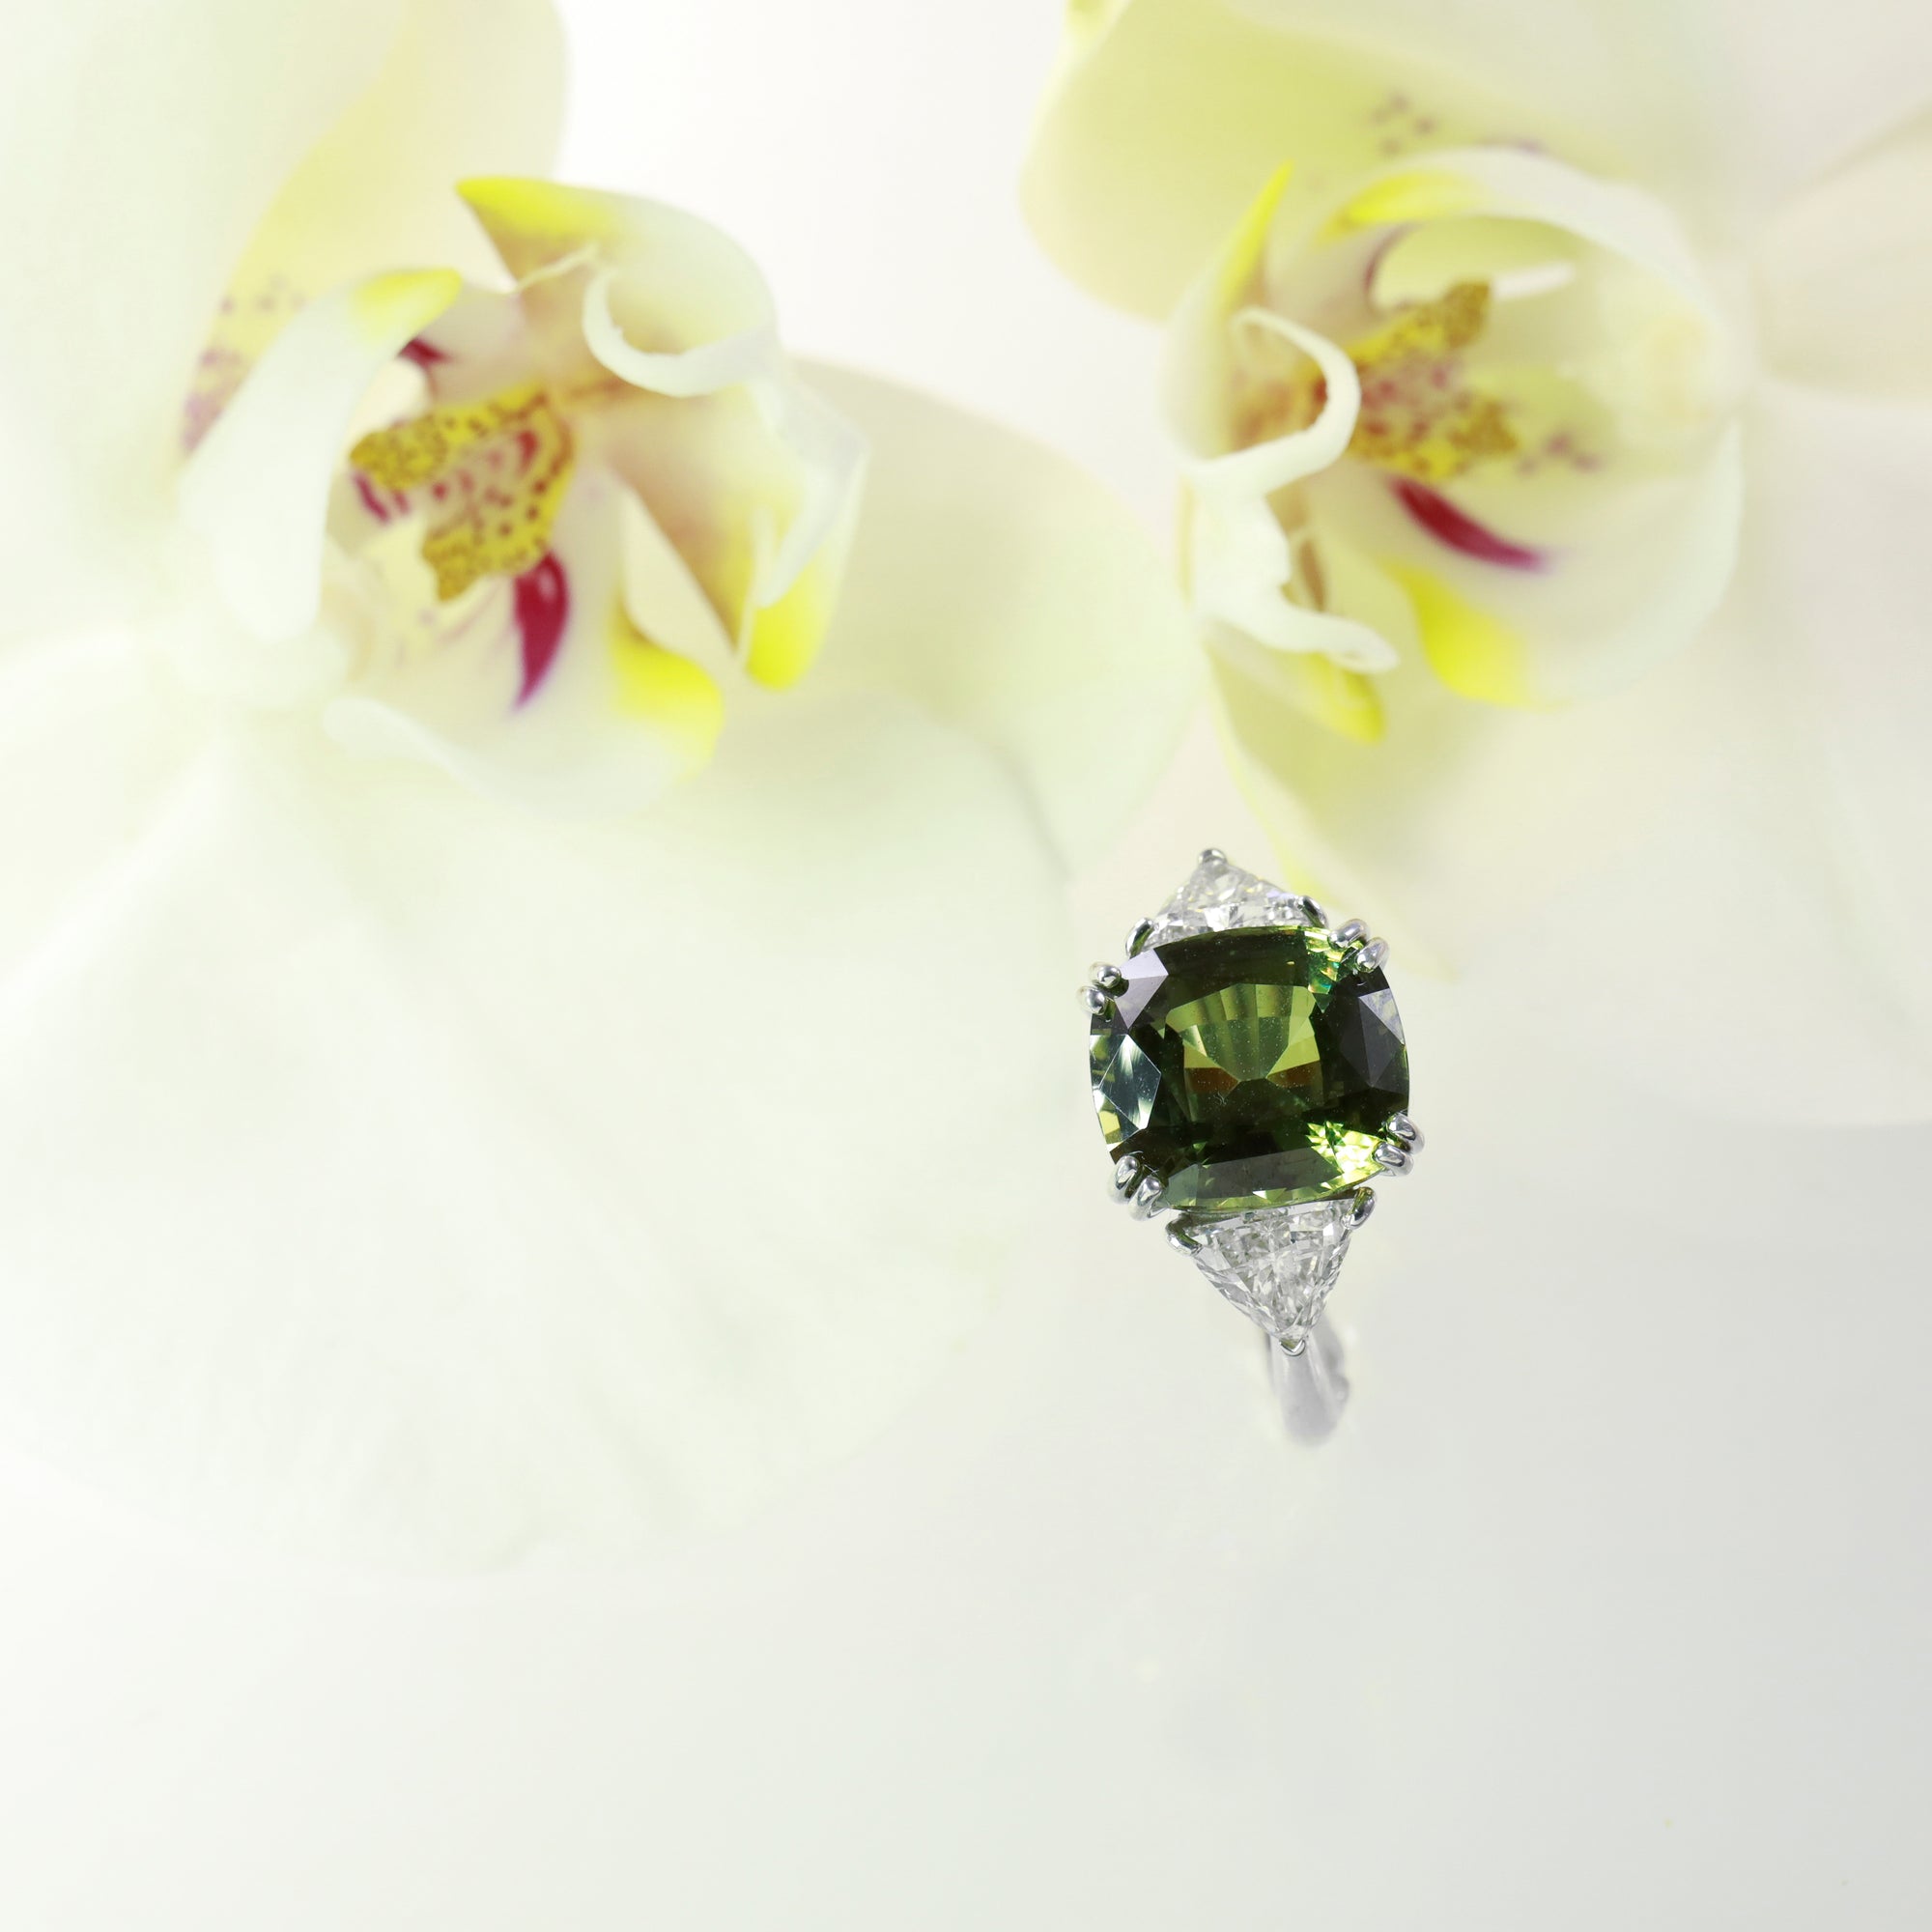 Platinum 3-stone natural sapphire and diamond ring featuring one 7.07 natural green-yellow sapphire, and two trillion diamonds weighing a total of 1.09 carats.